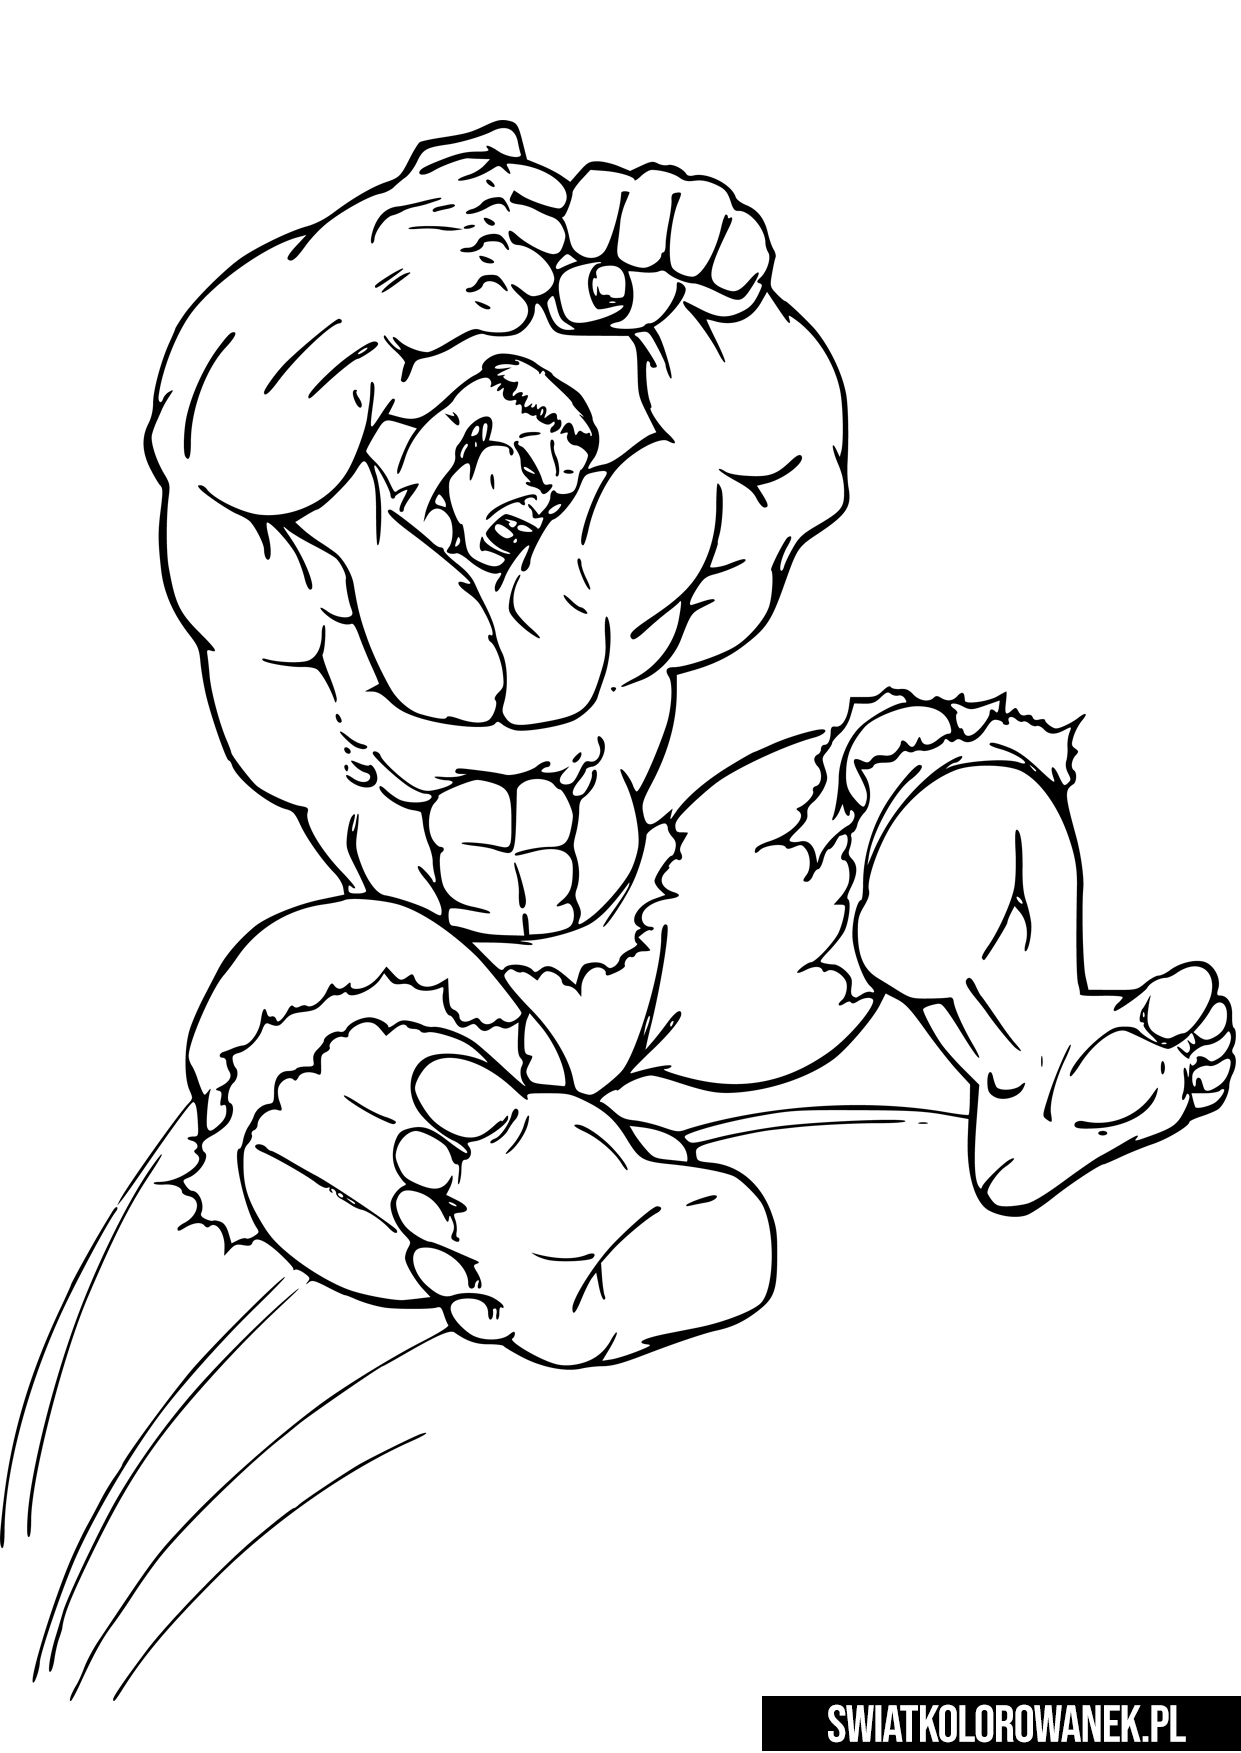 31 Mighty Hulk Coloring Pages Printable 33